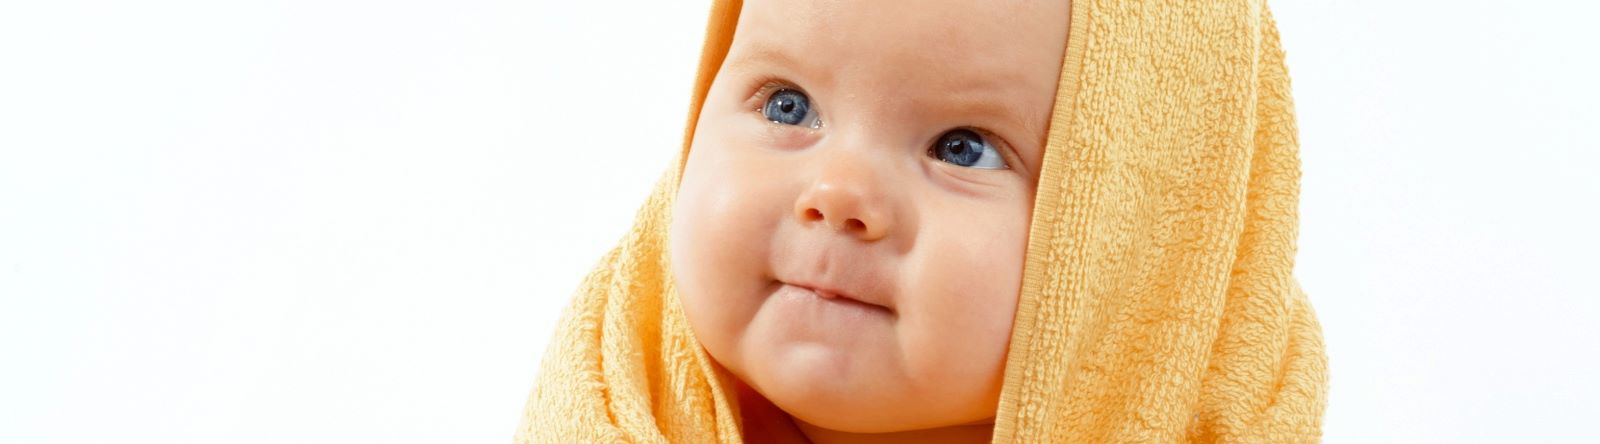 How to rinse the baby nose with saline solution and syringe?